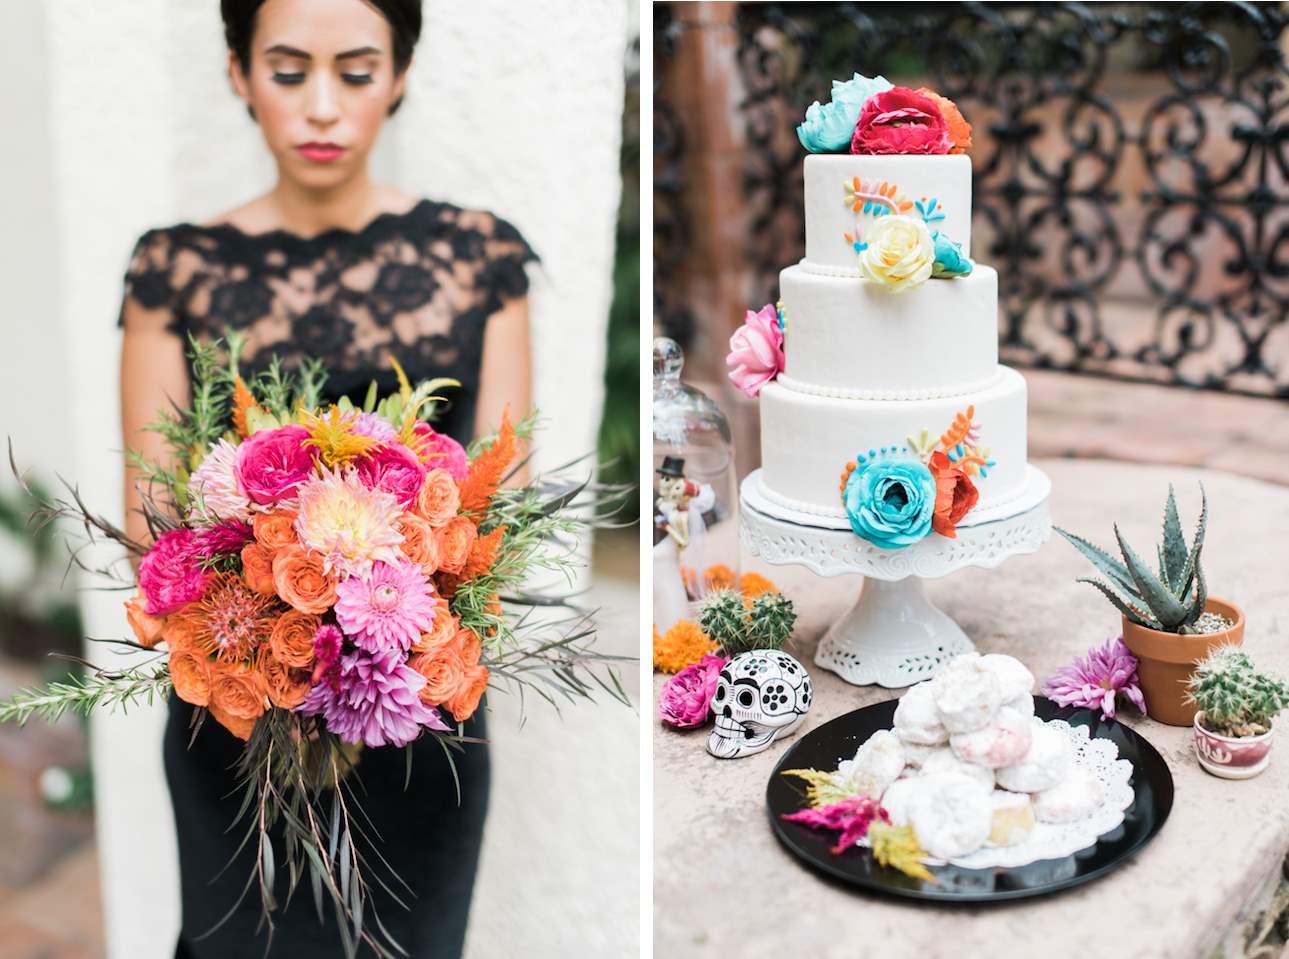 COCO Wedding Ideas - How to Have a "Day of the Dead" Inspired Wedding